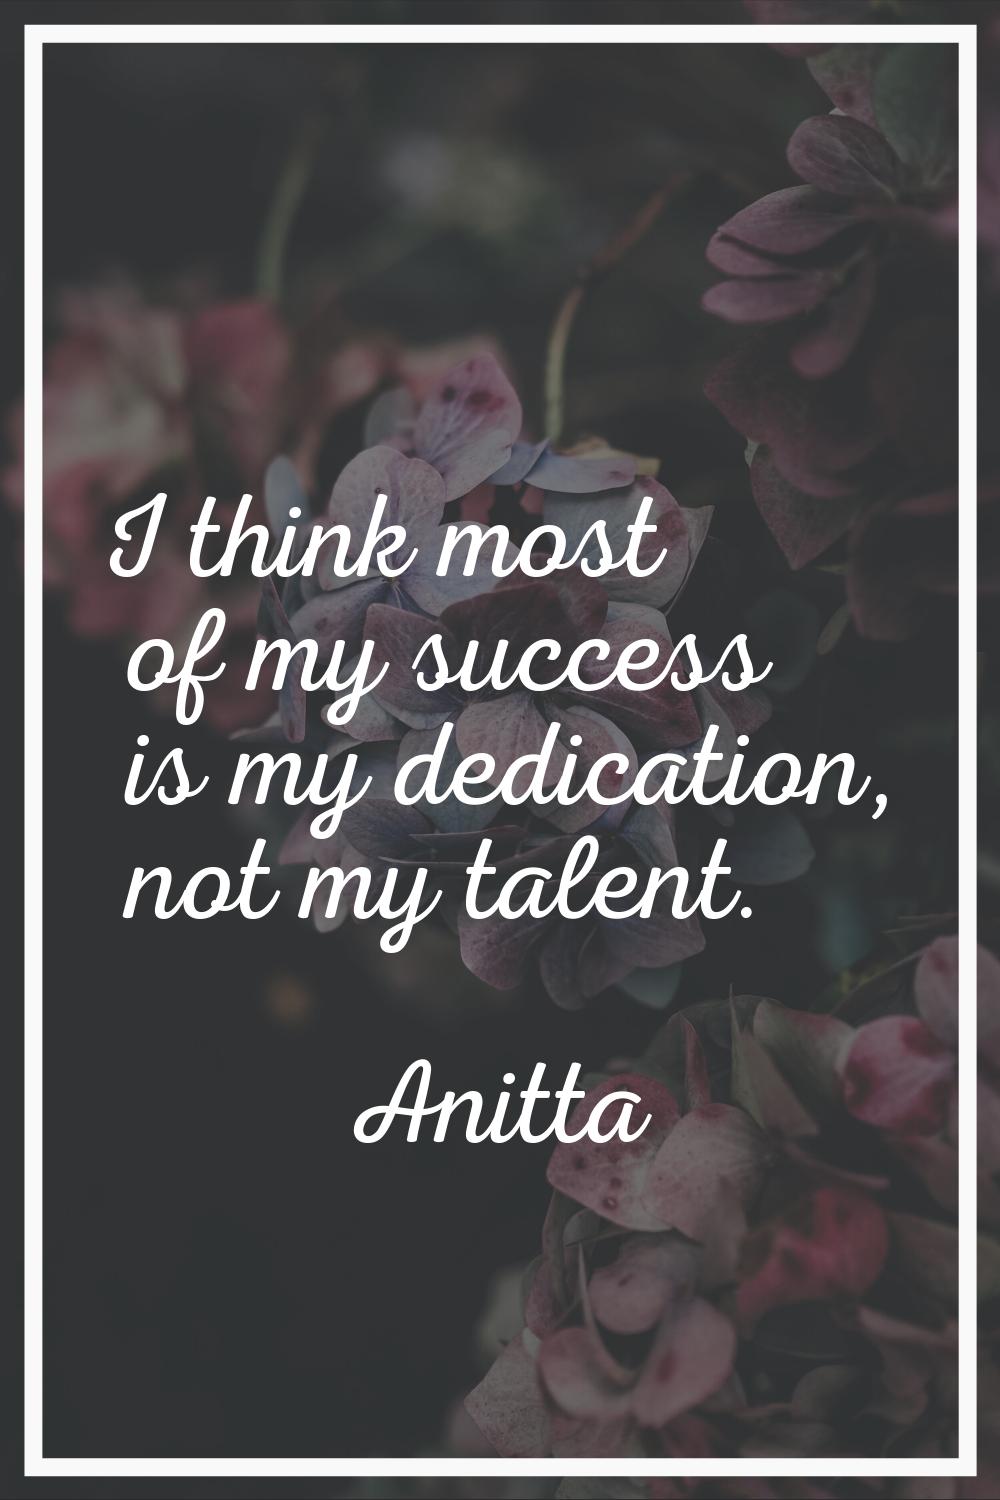 I think most of my success is my dedication, not my talent.